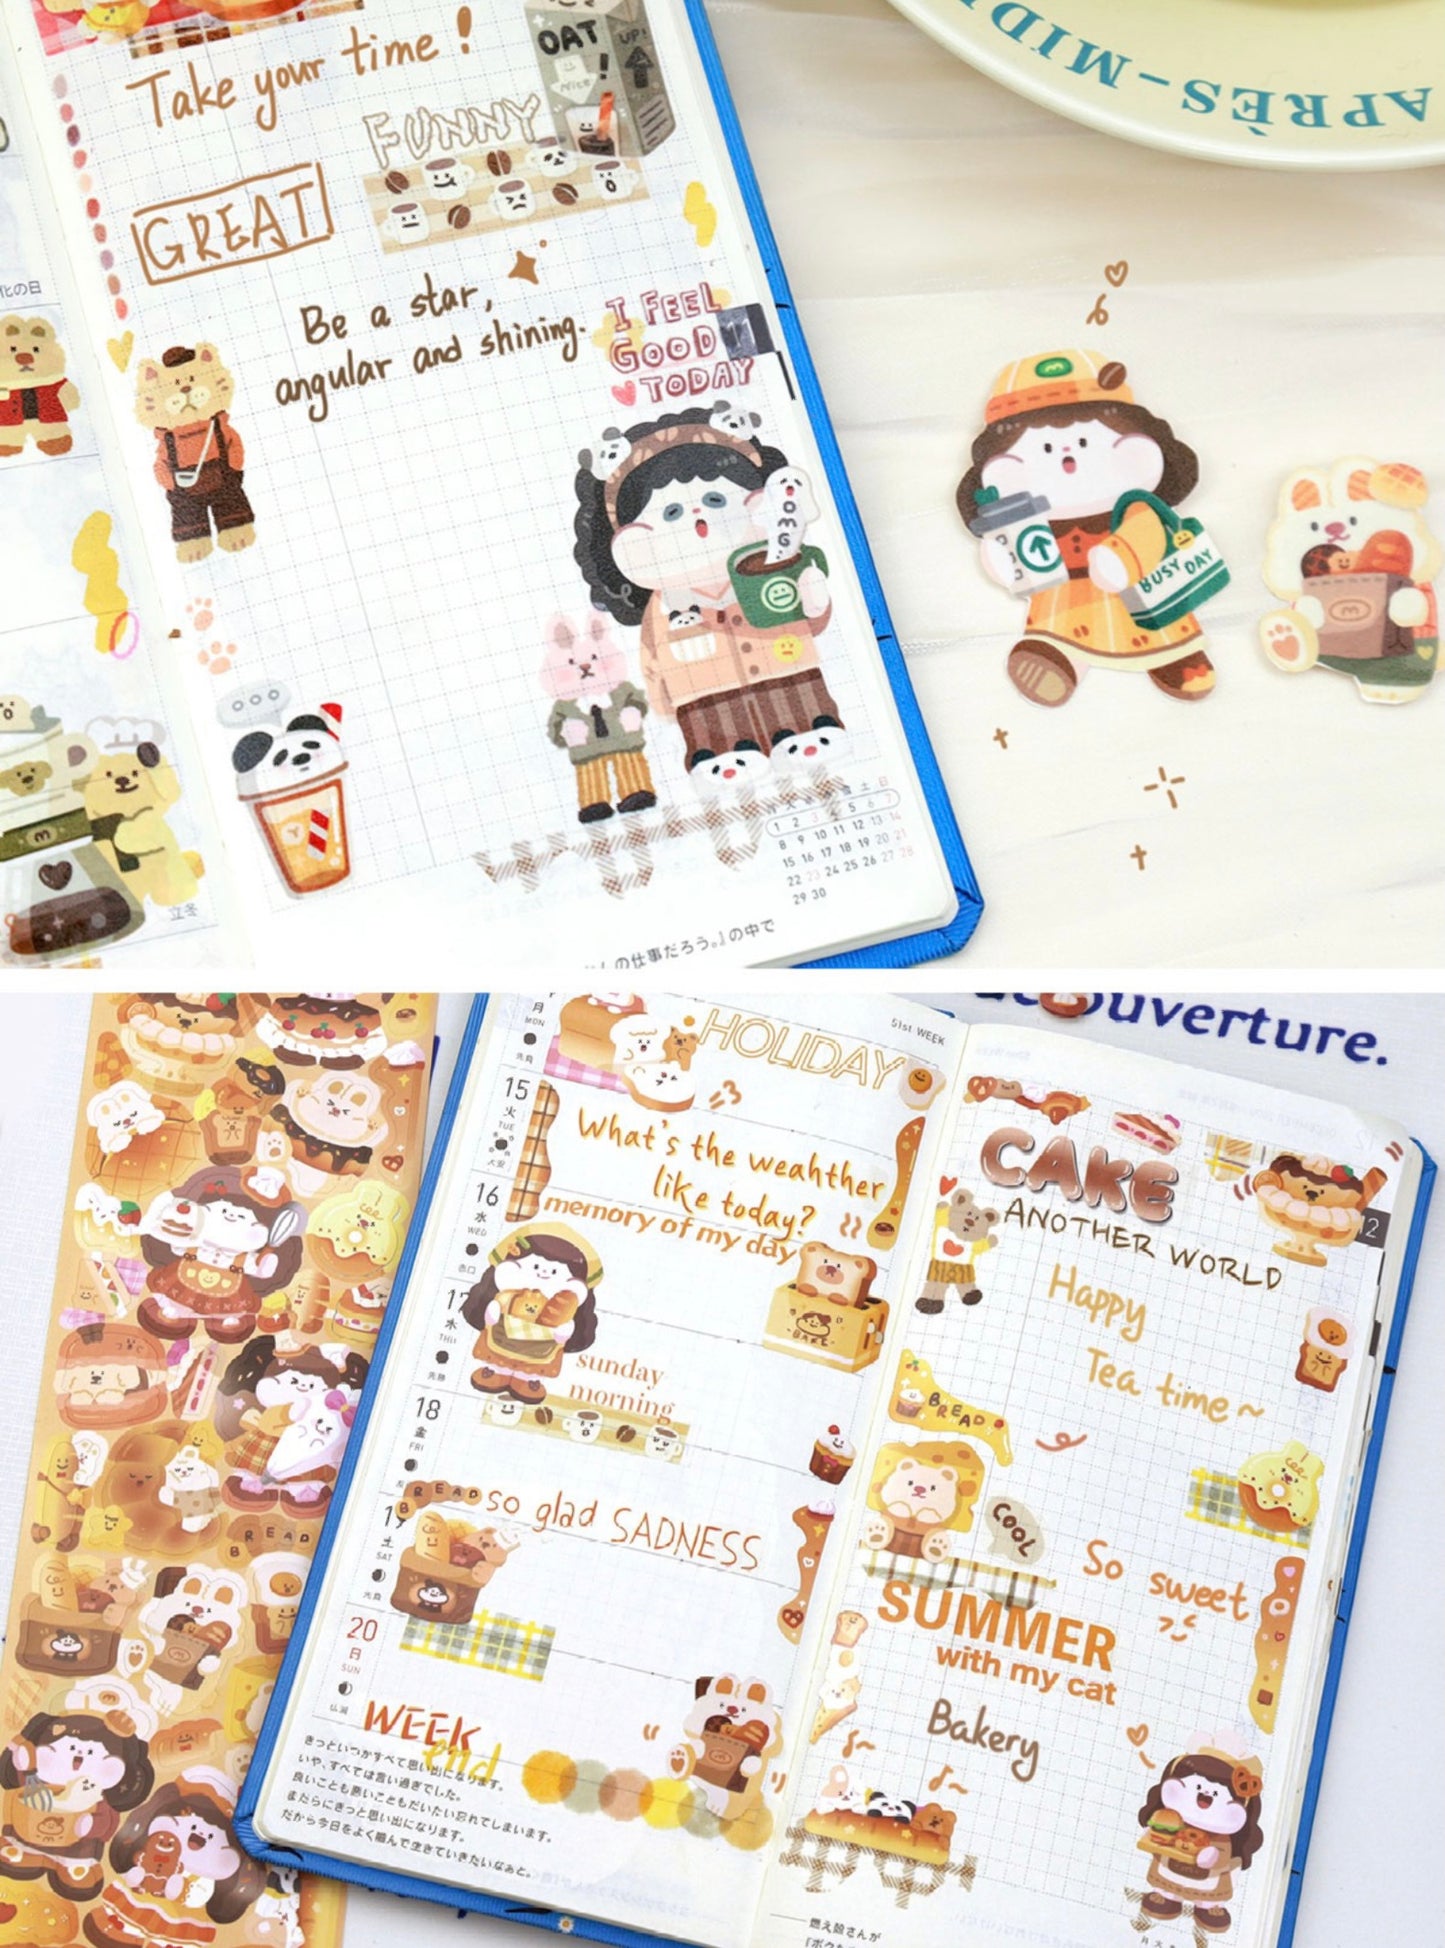 Meatball 「Coffee and Bread」washitape and sticker tape